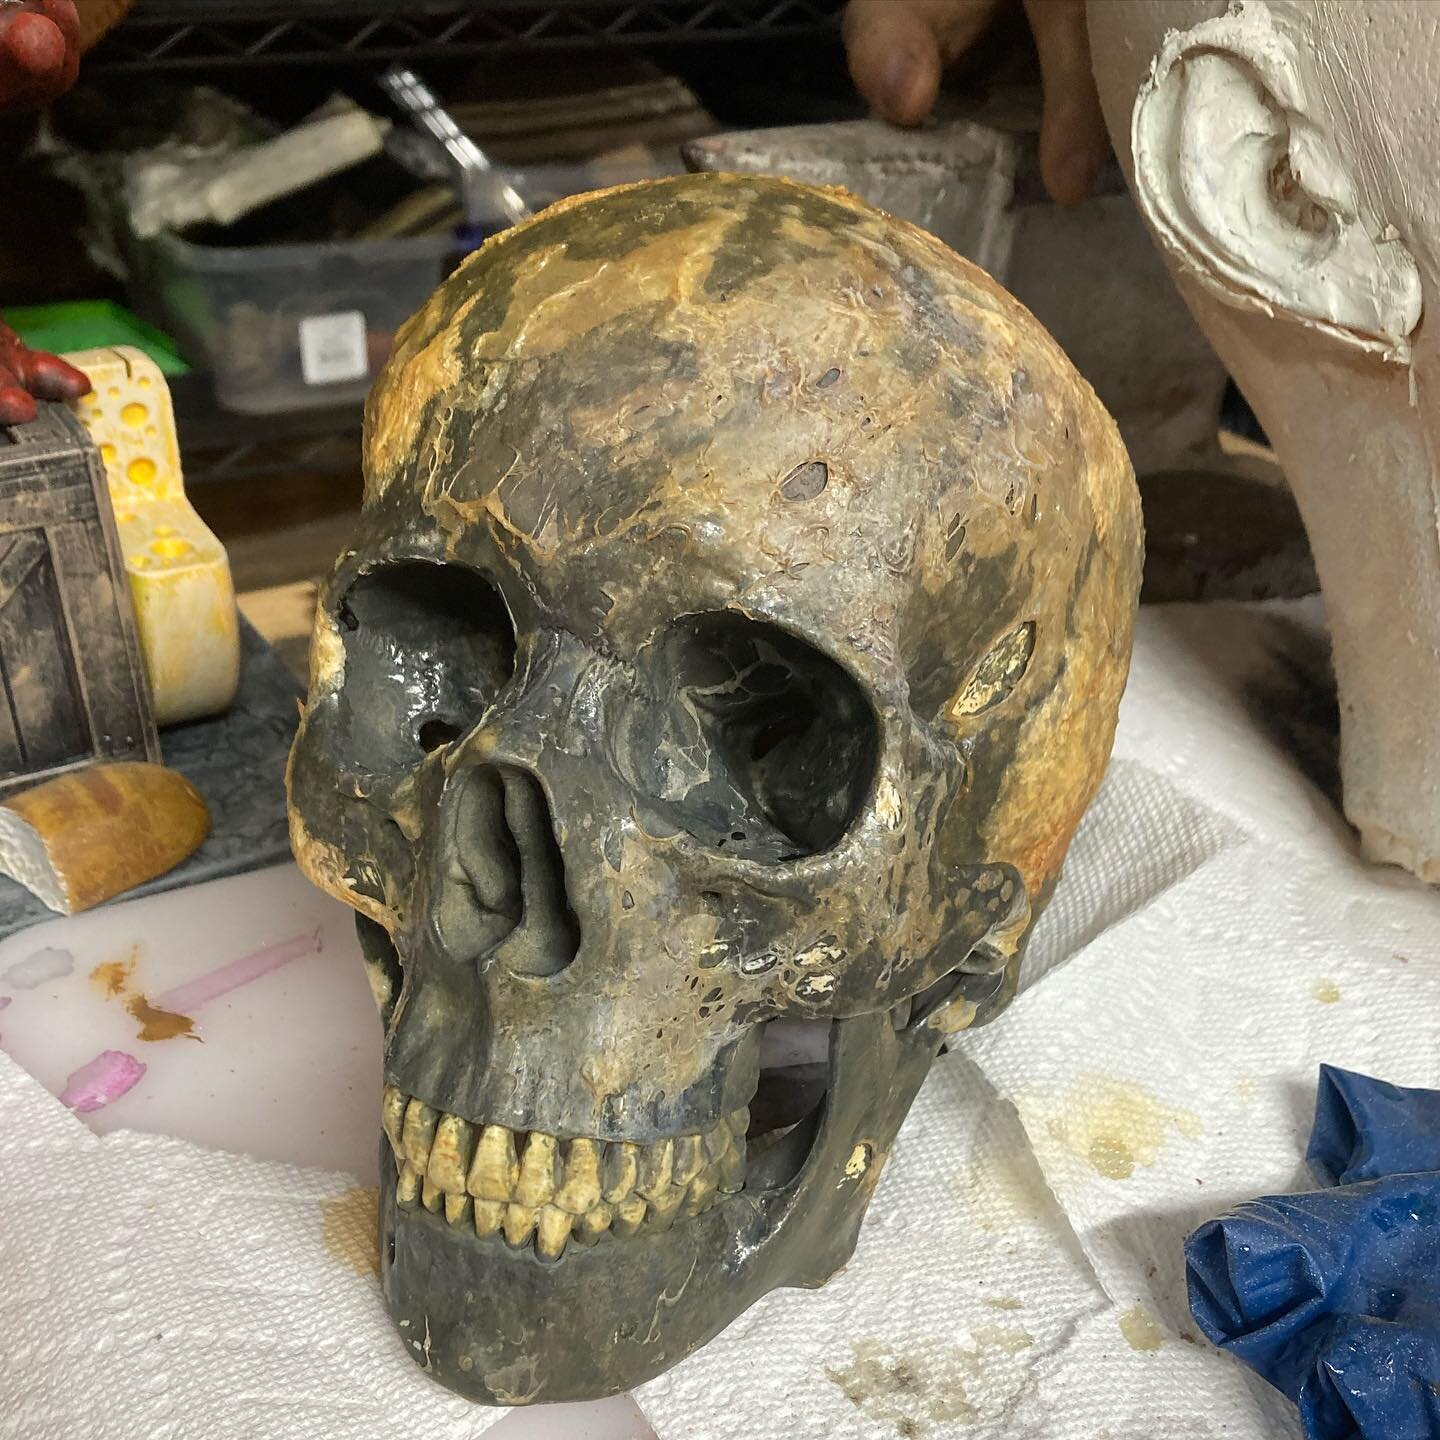 How about something really macabre for a change? 
A little liquid latex and the right paint job go a long ways.
#prop #propmaker #fxartist #macabre #skull #crispy #fx #sfxartist #moviemagic #deathshead #nmfilm #smoothon